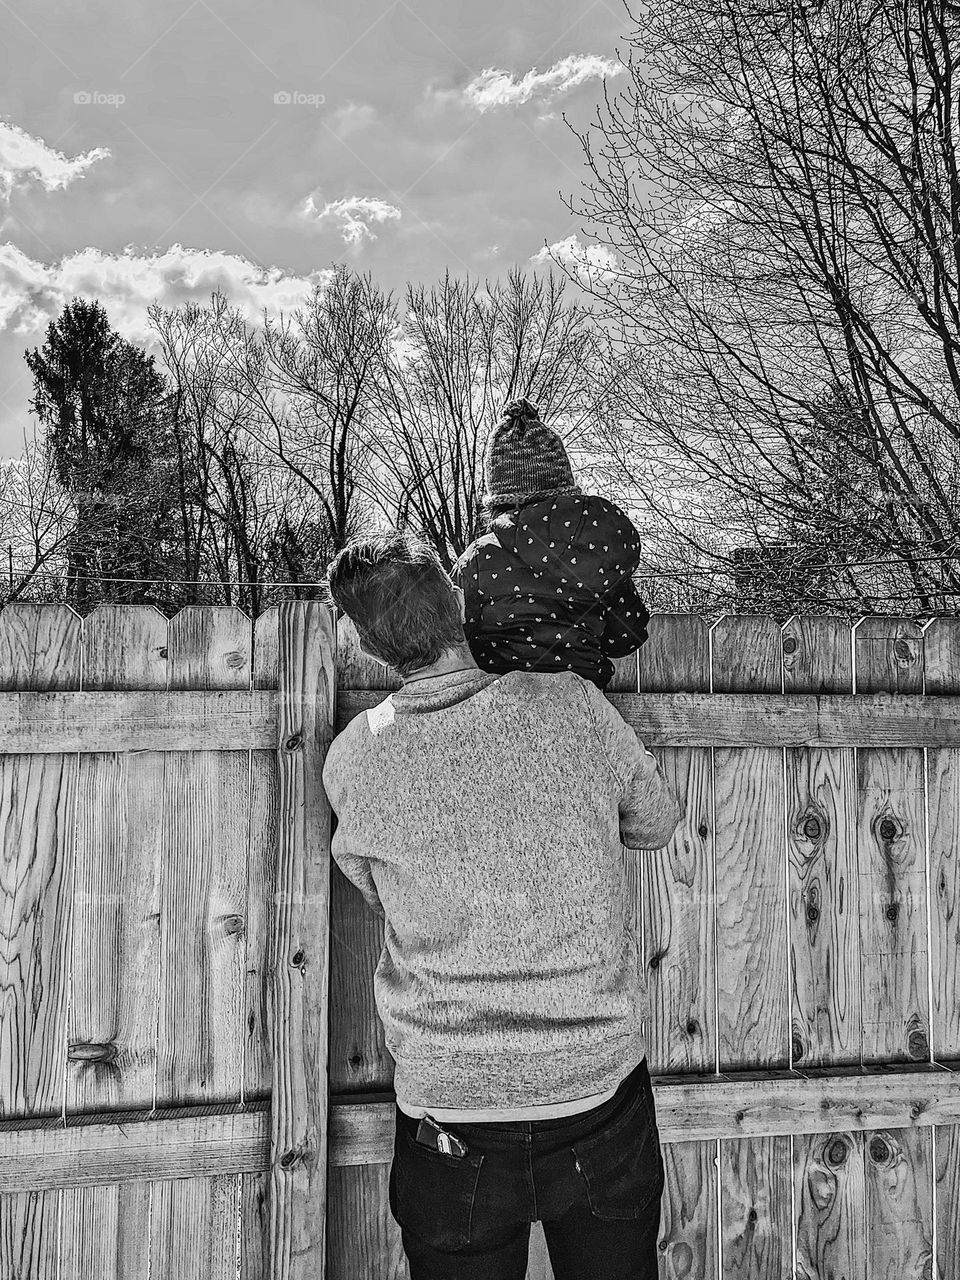 Daddy looks over fence with daughter, showing daughter the world, looking over the fence